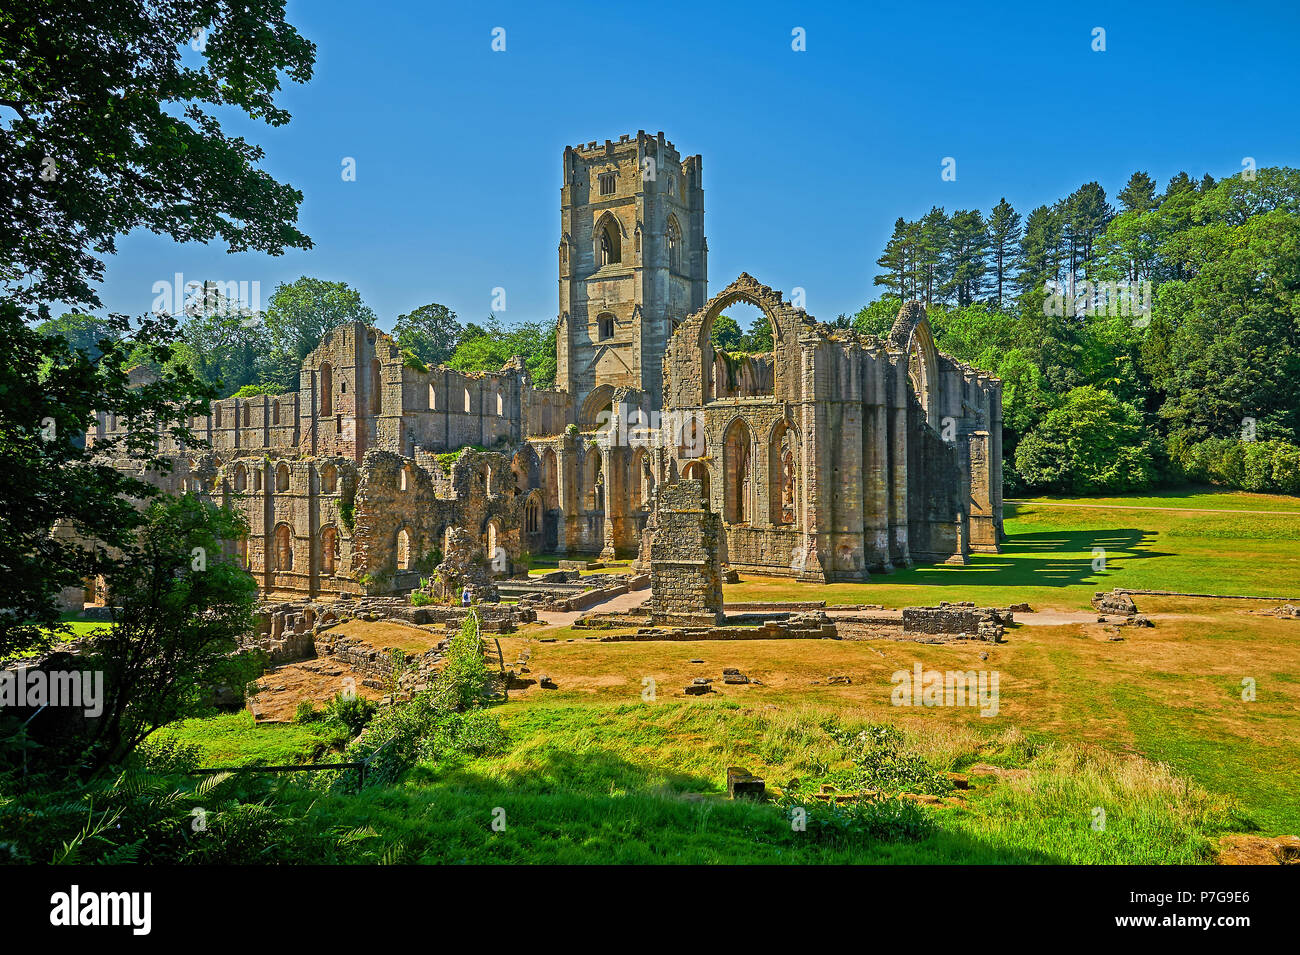 The ruins of Fountains Abbey in North Yorkshire under a clear blue sky. The abbey was largely destroyed during King Henry VIII's reformation. Stock Photo